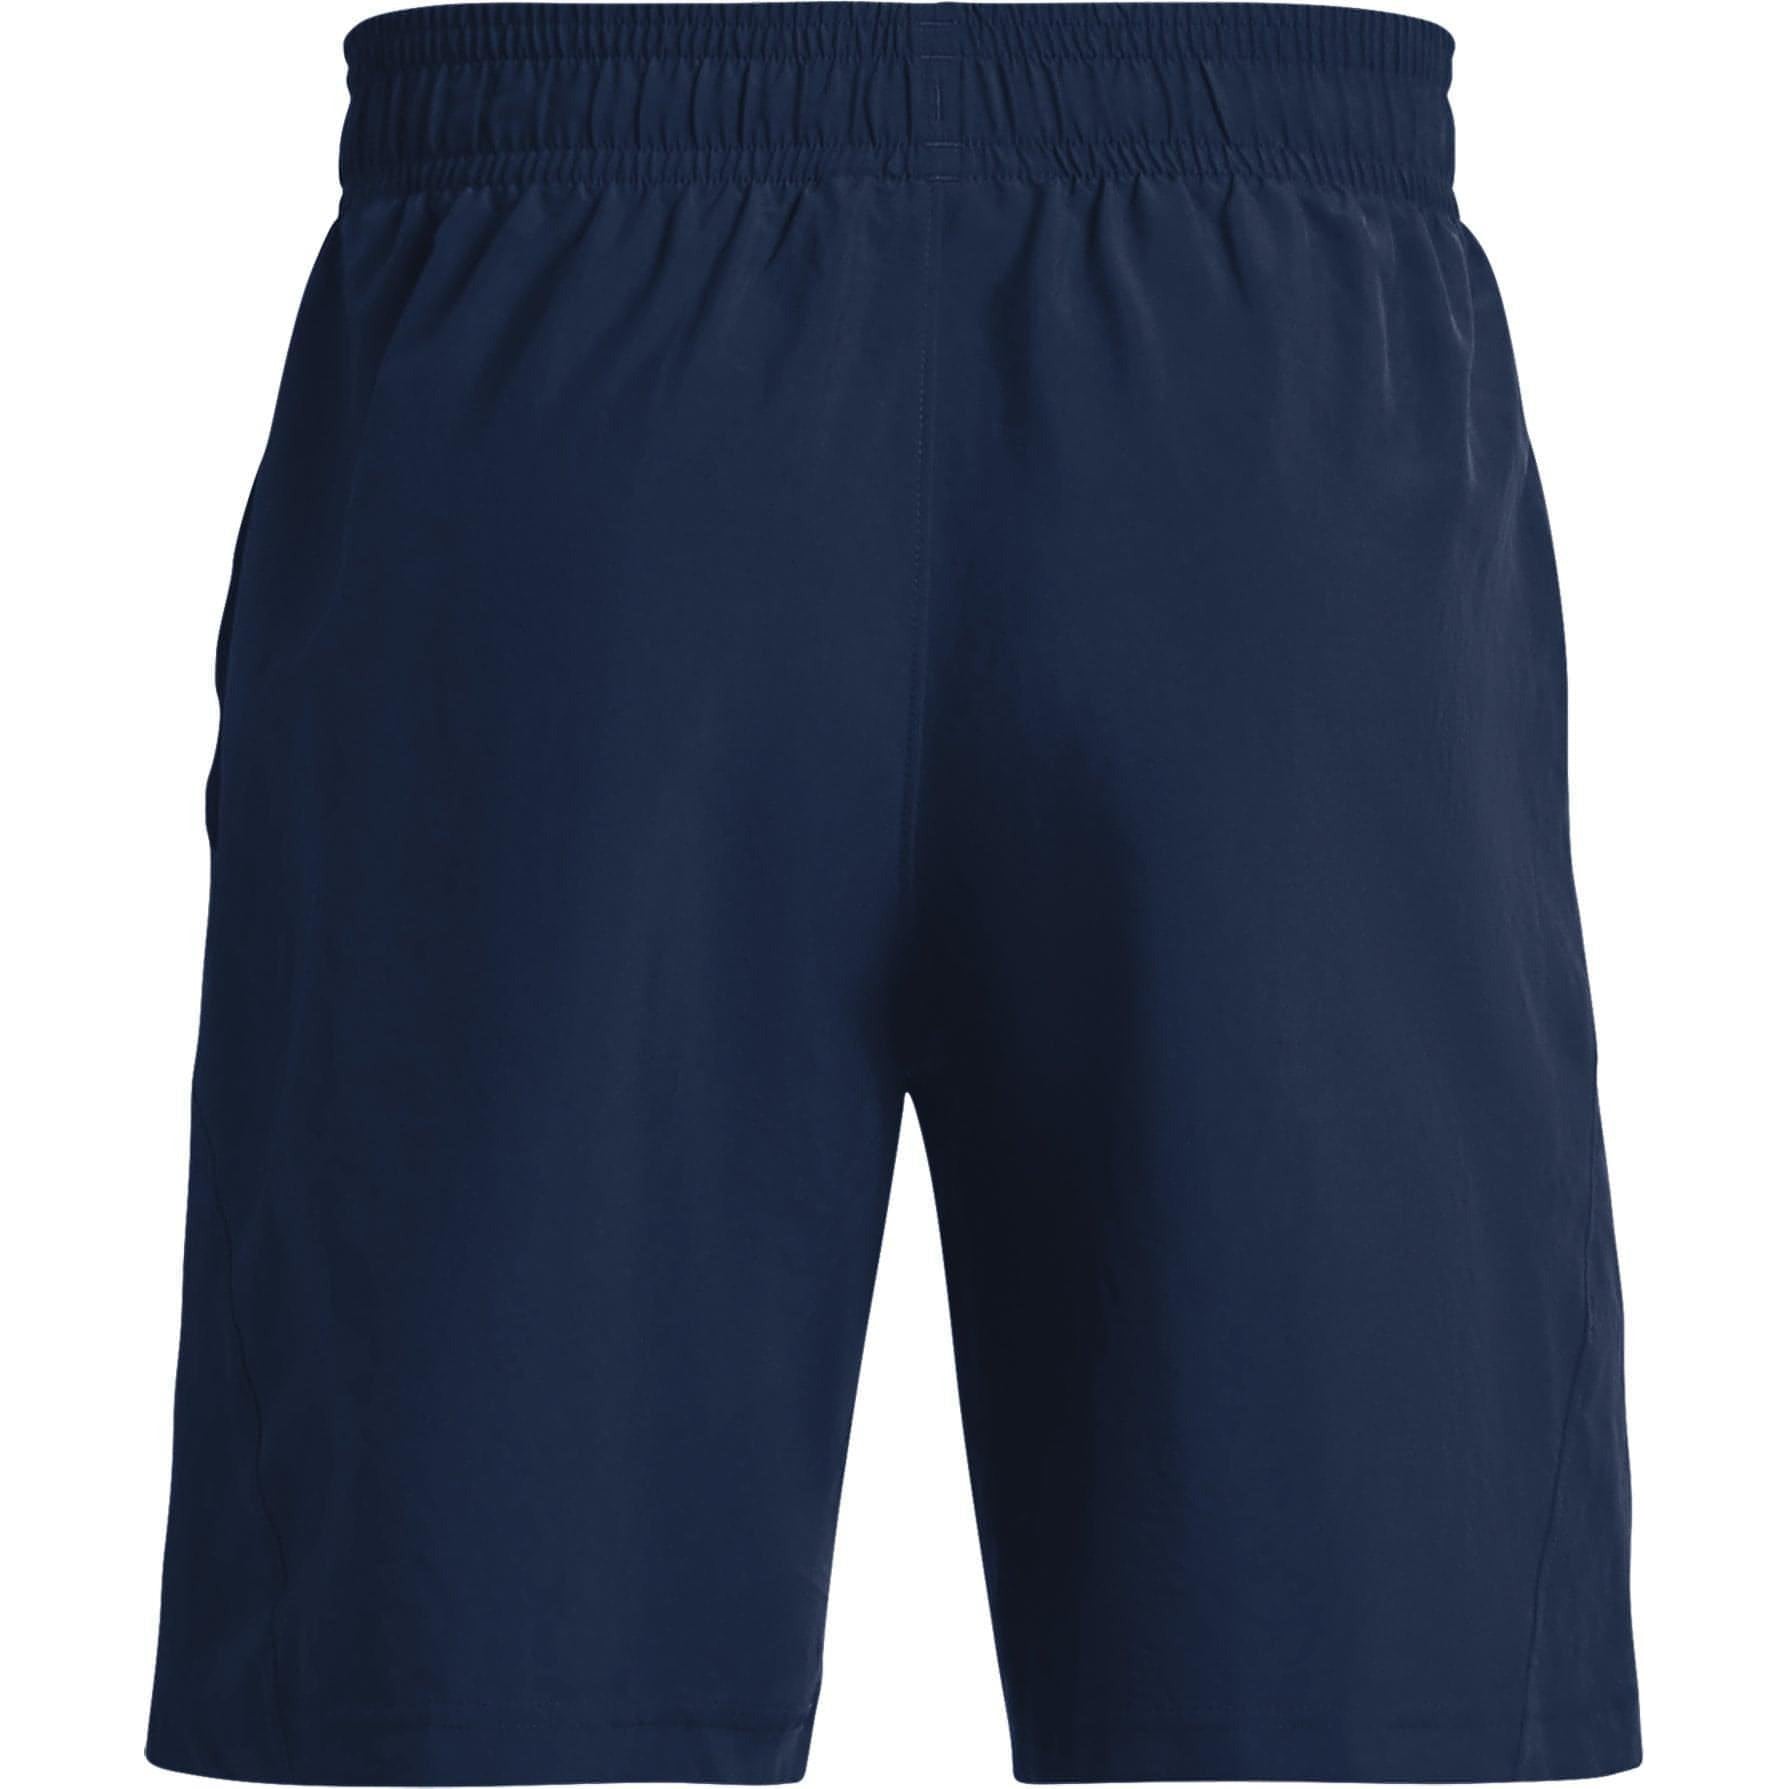 Under Armour Woven Graphic Wordmark Shorts Back2